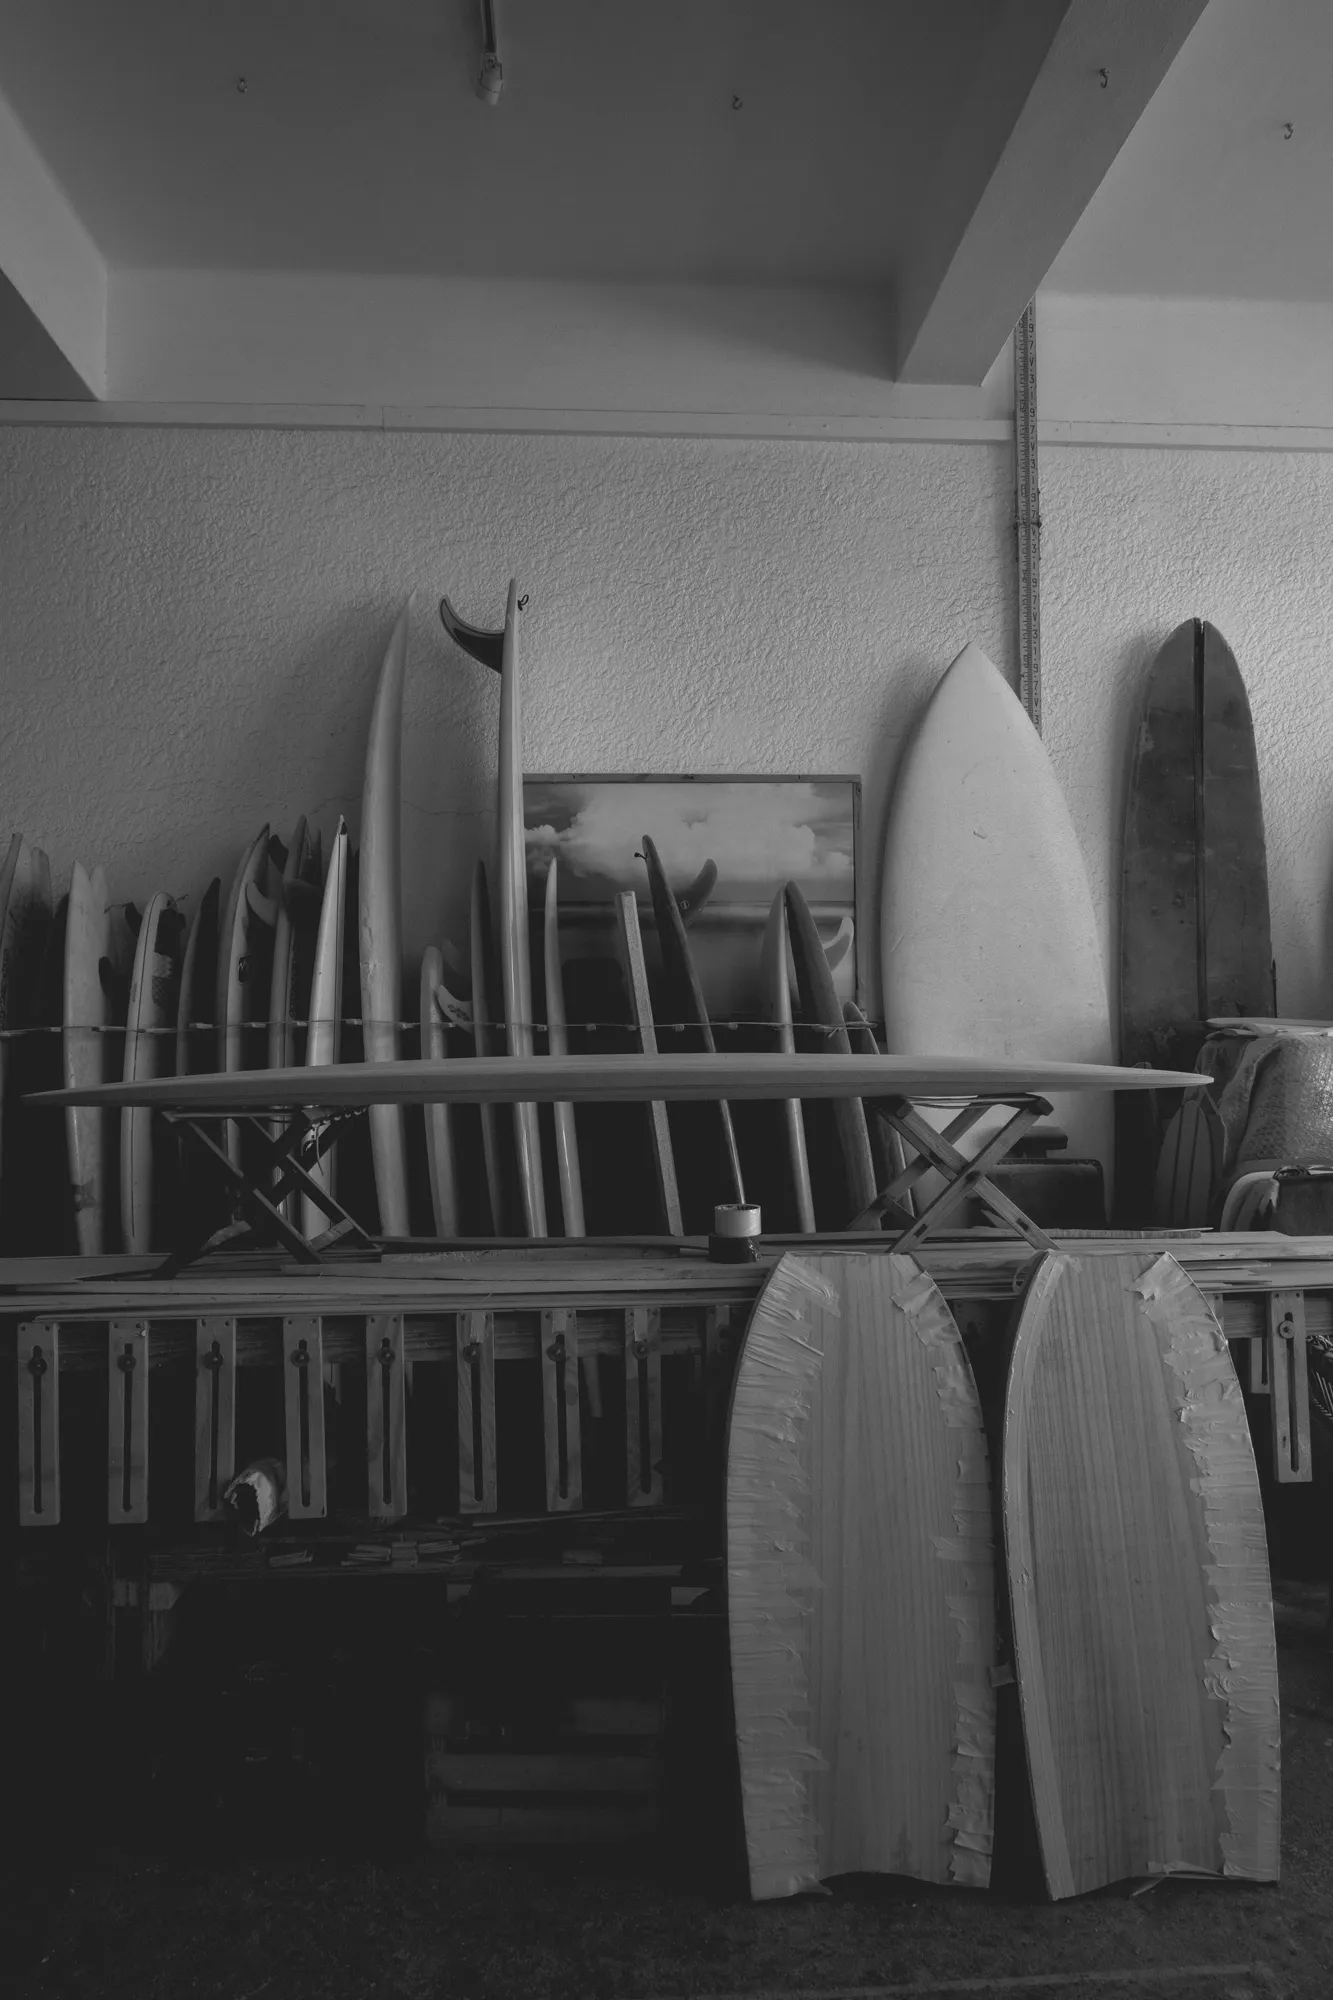 2022-02-14 - Cape Town - Surfboards in a surfboard shop